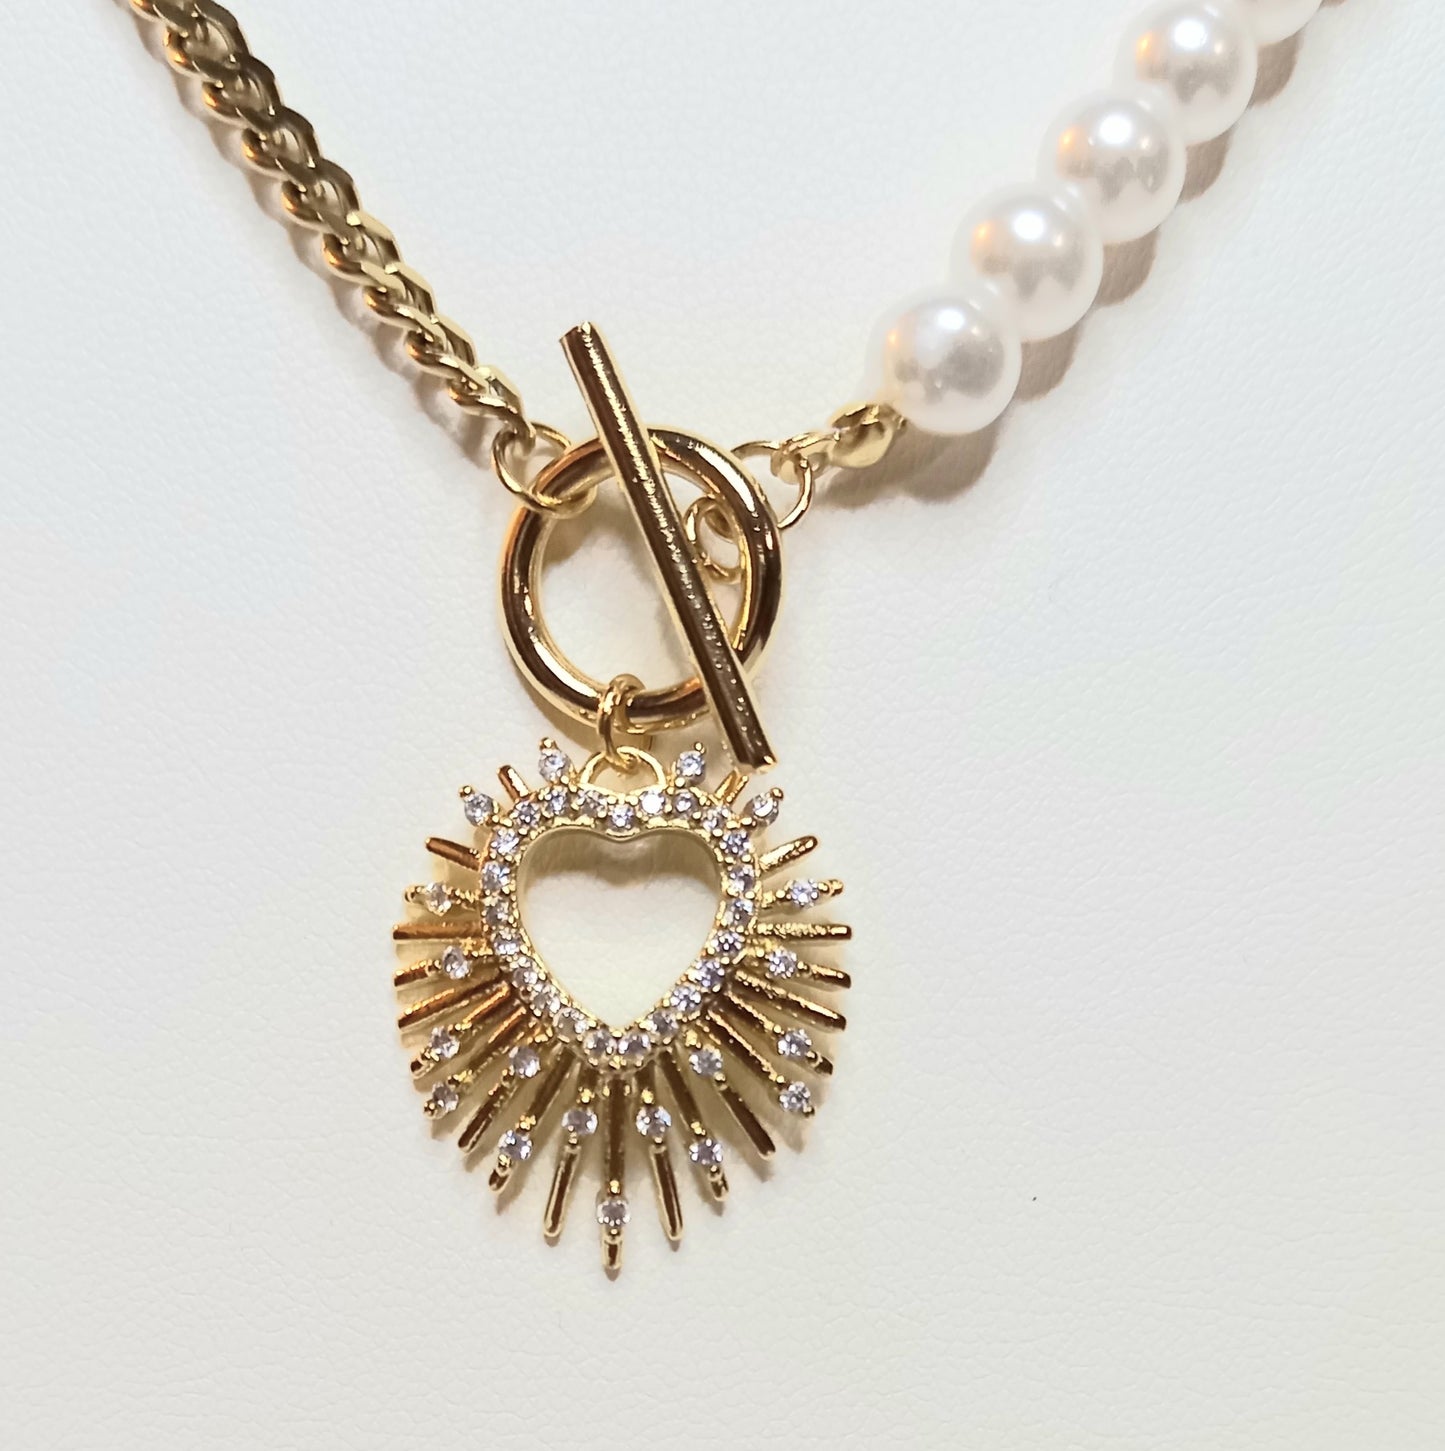 Aphrodite necklace with these pearl earrings